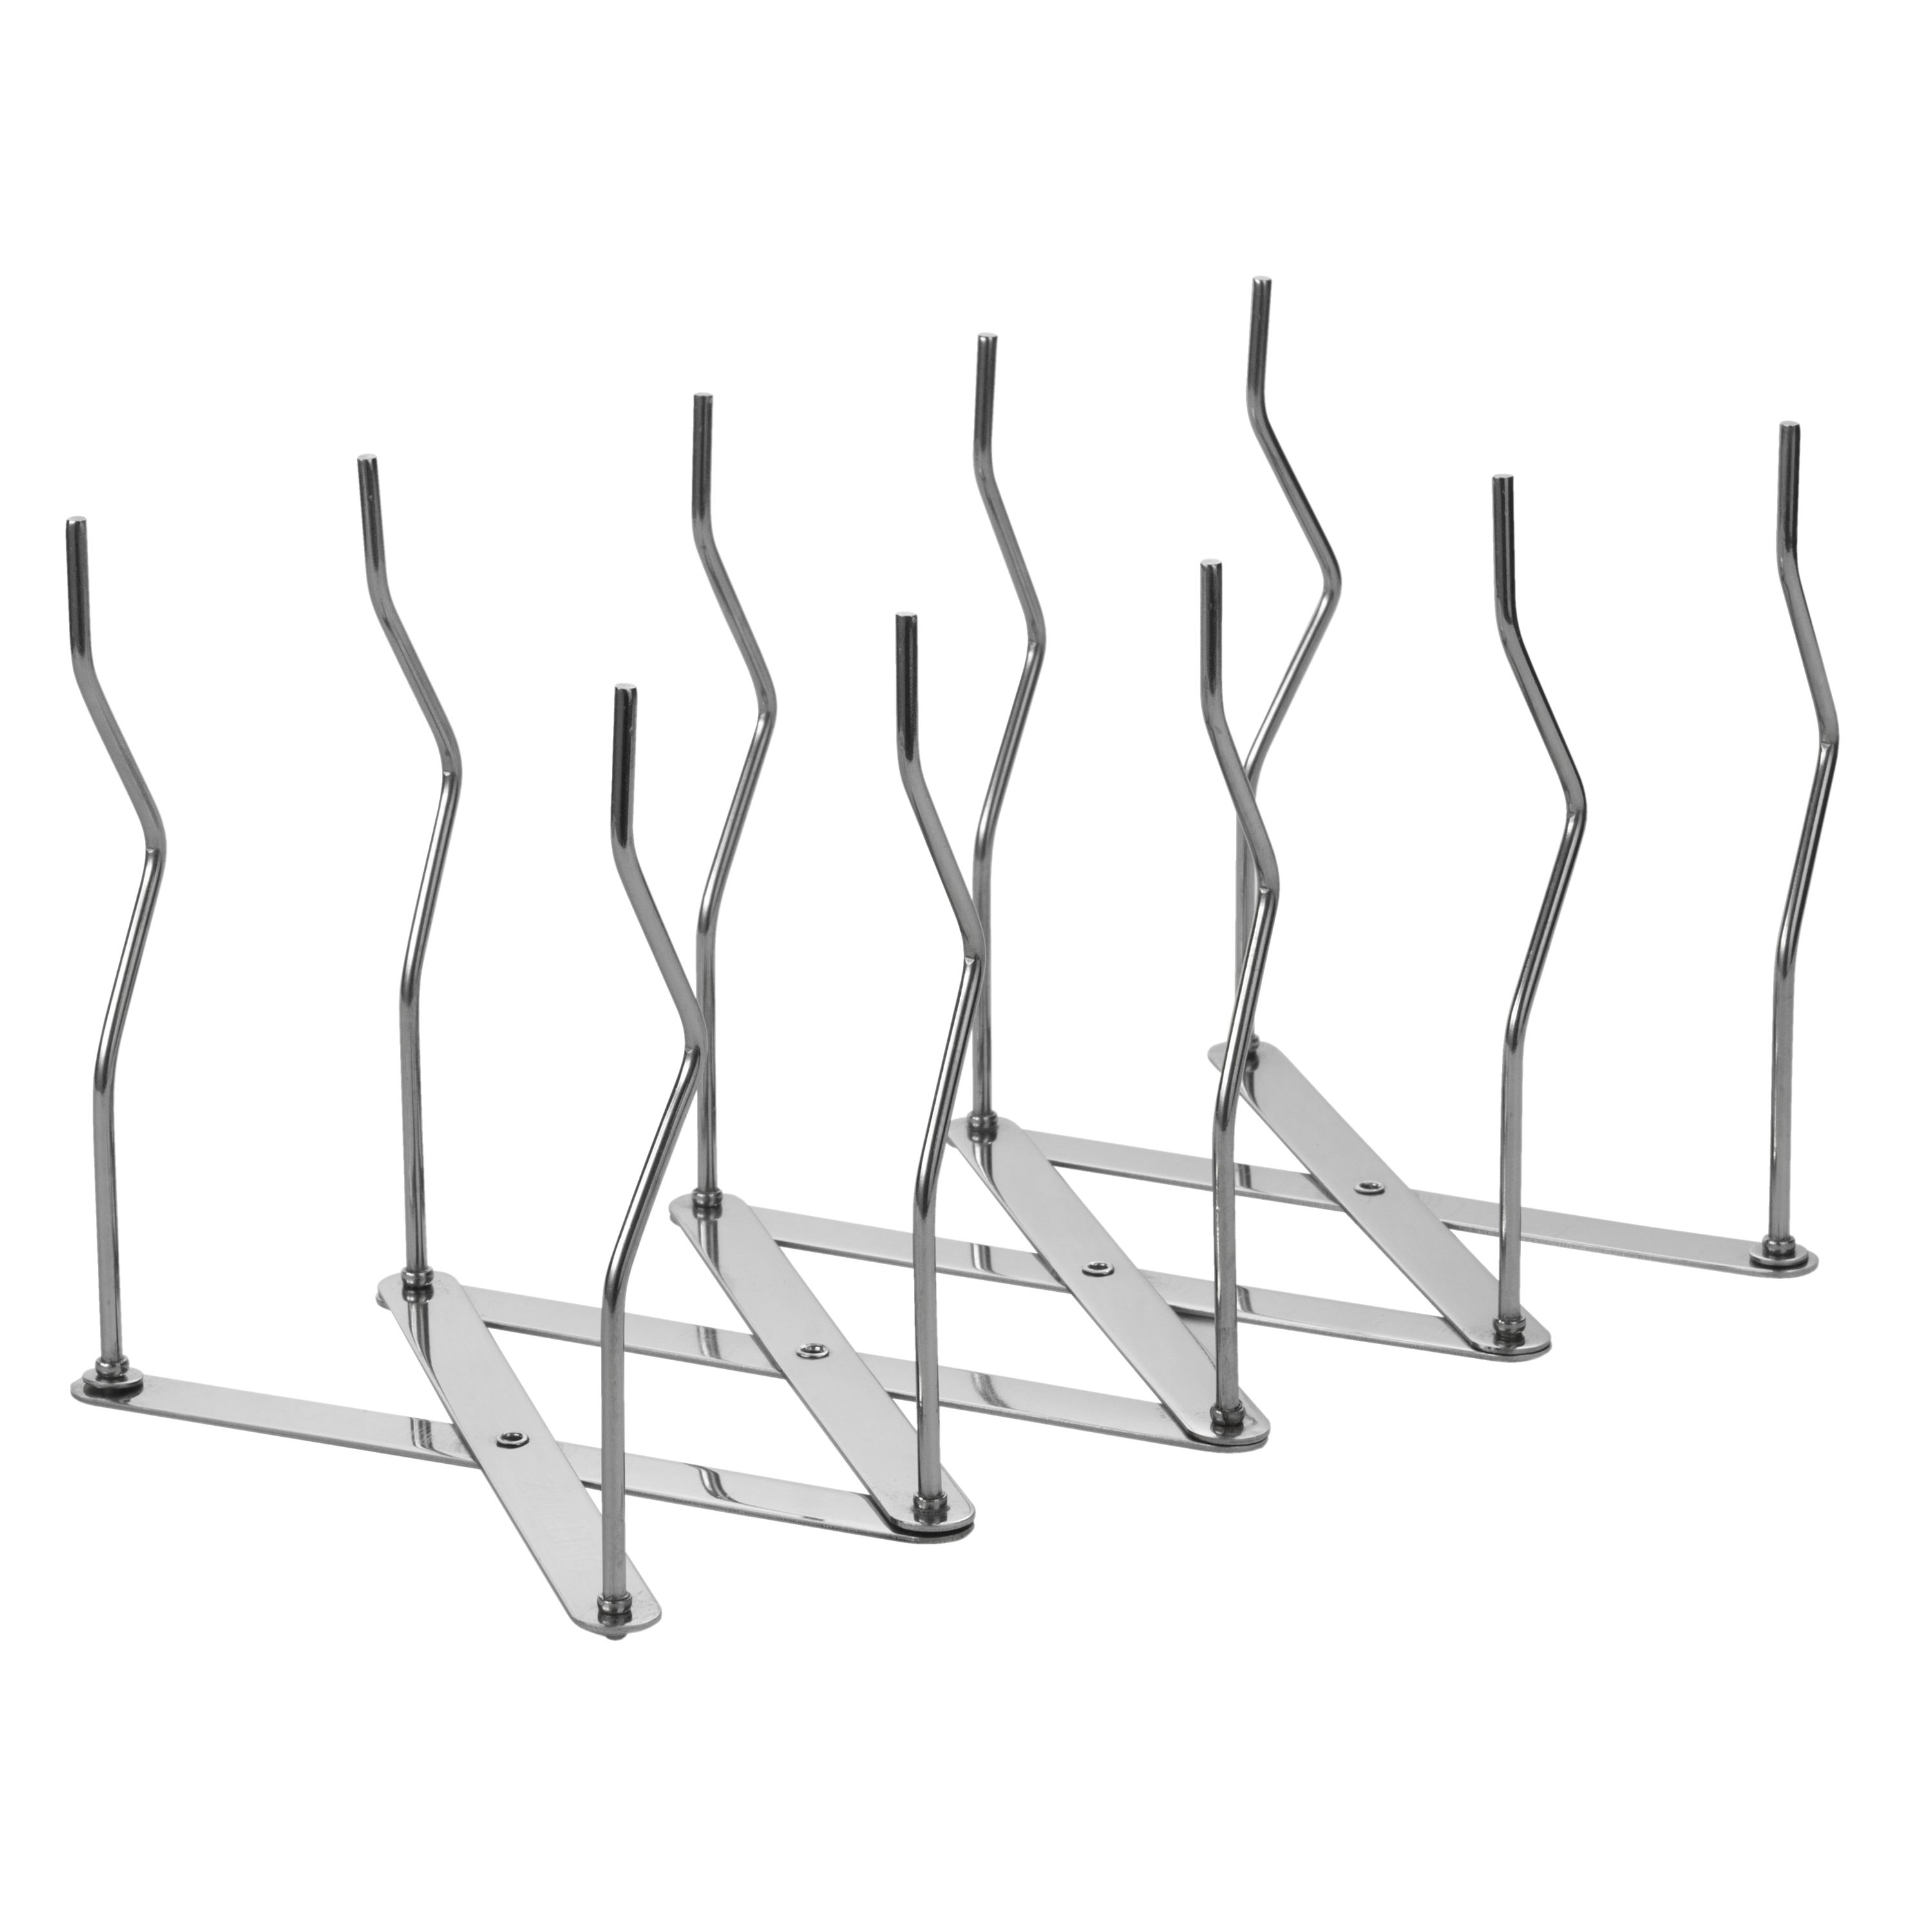 Stainless Steel Sous Vide Weights Rack with 7 Dividers for Sous